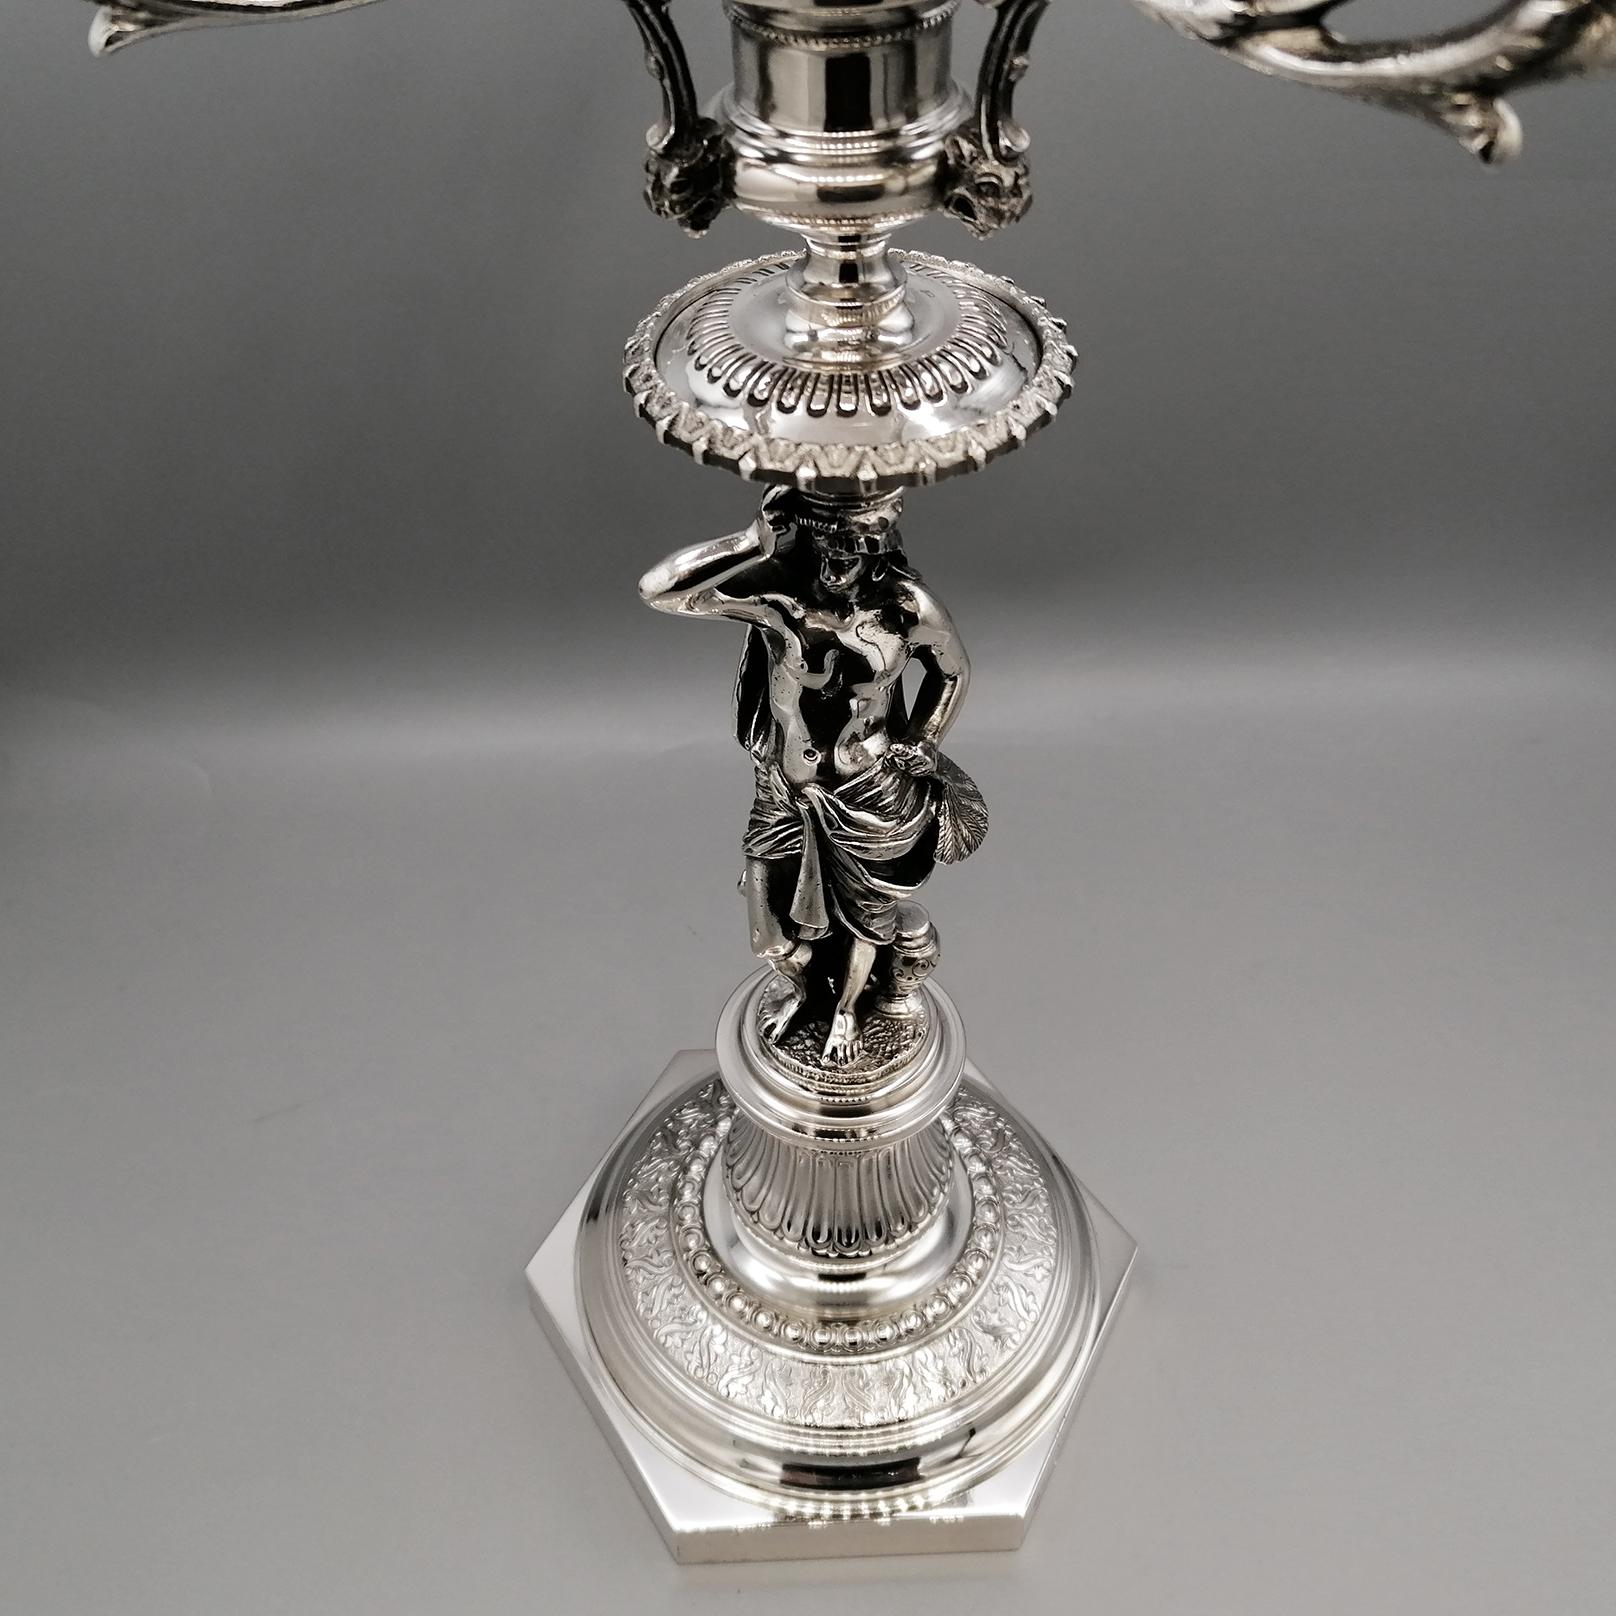 XX Century Italian Solid Silver pair of Candelabras For Sale 2